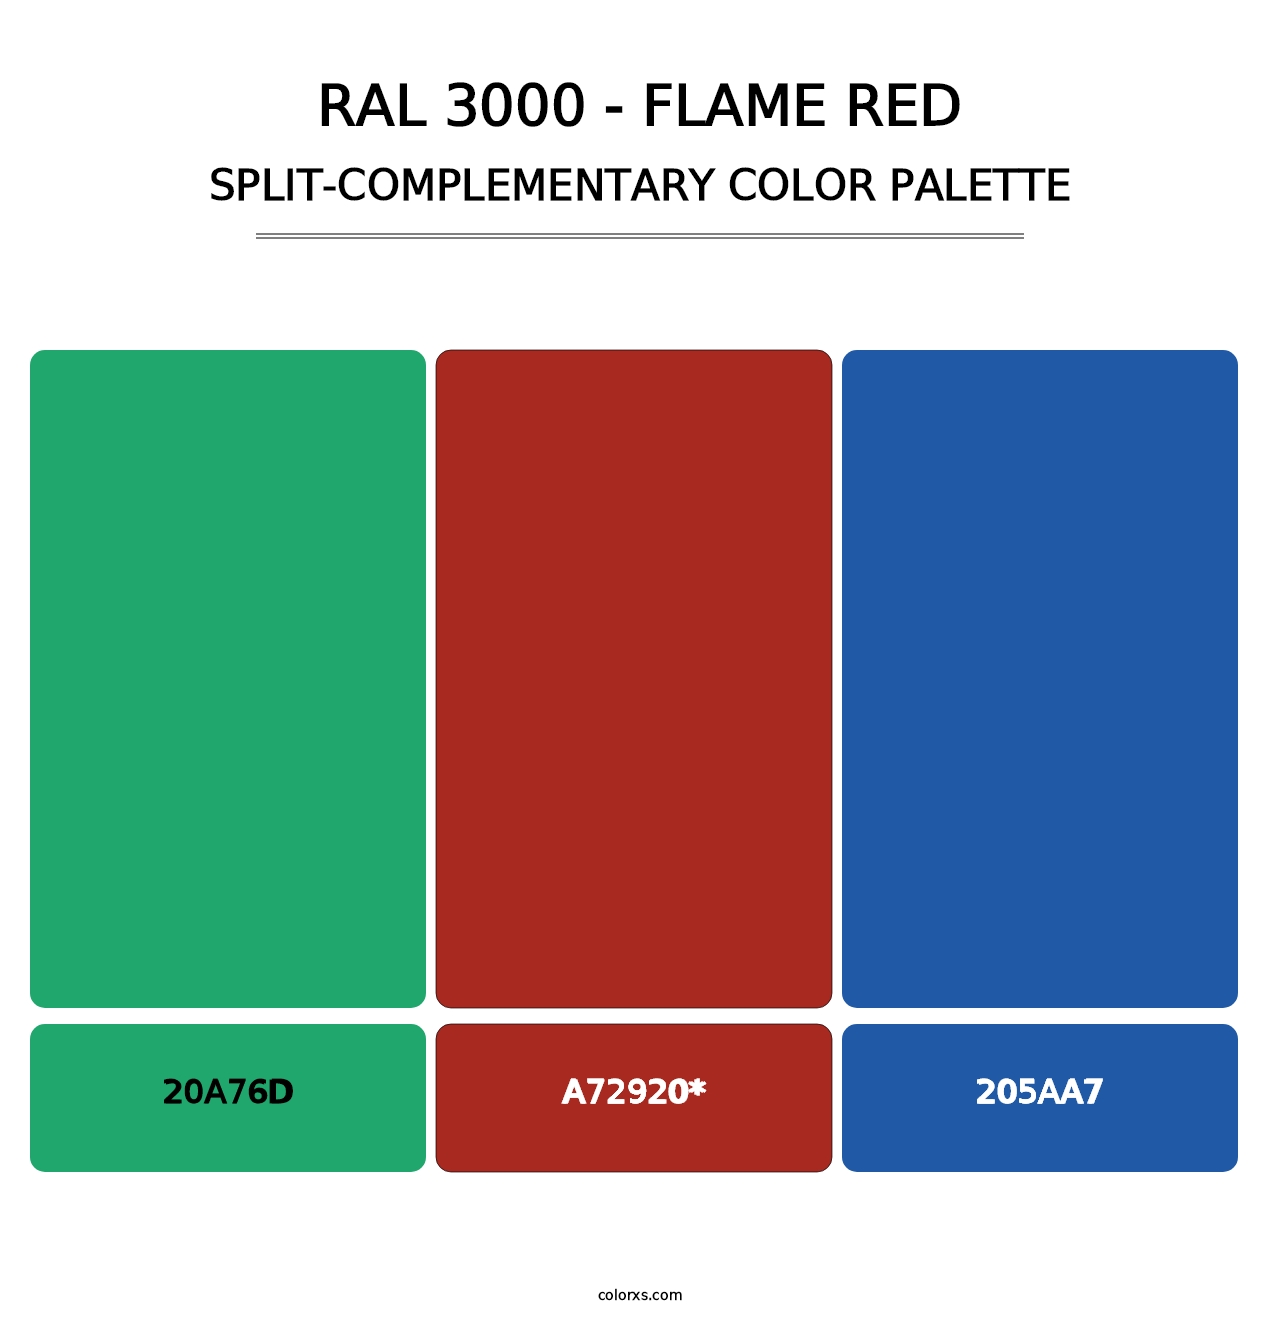 RAL 3000 - Flame Red - Split-Complementary Color Palette